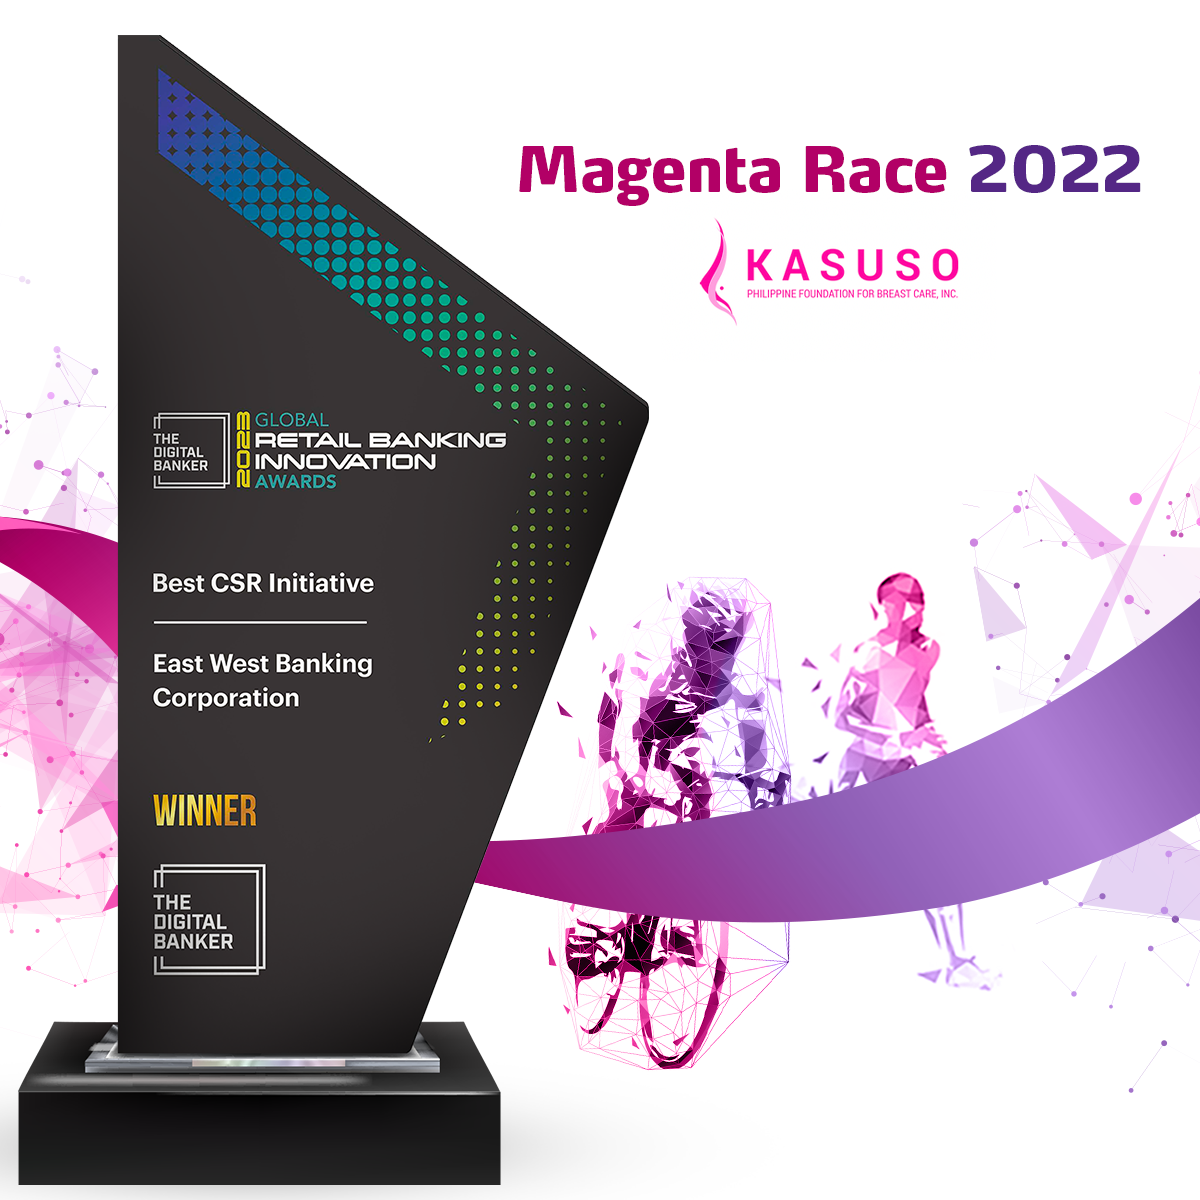 Eastwest’s Magenta Race Recognized as Best CSR Initiative by the Digital Banker